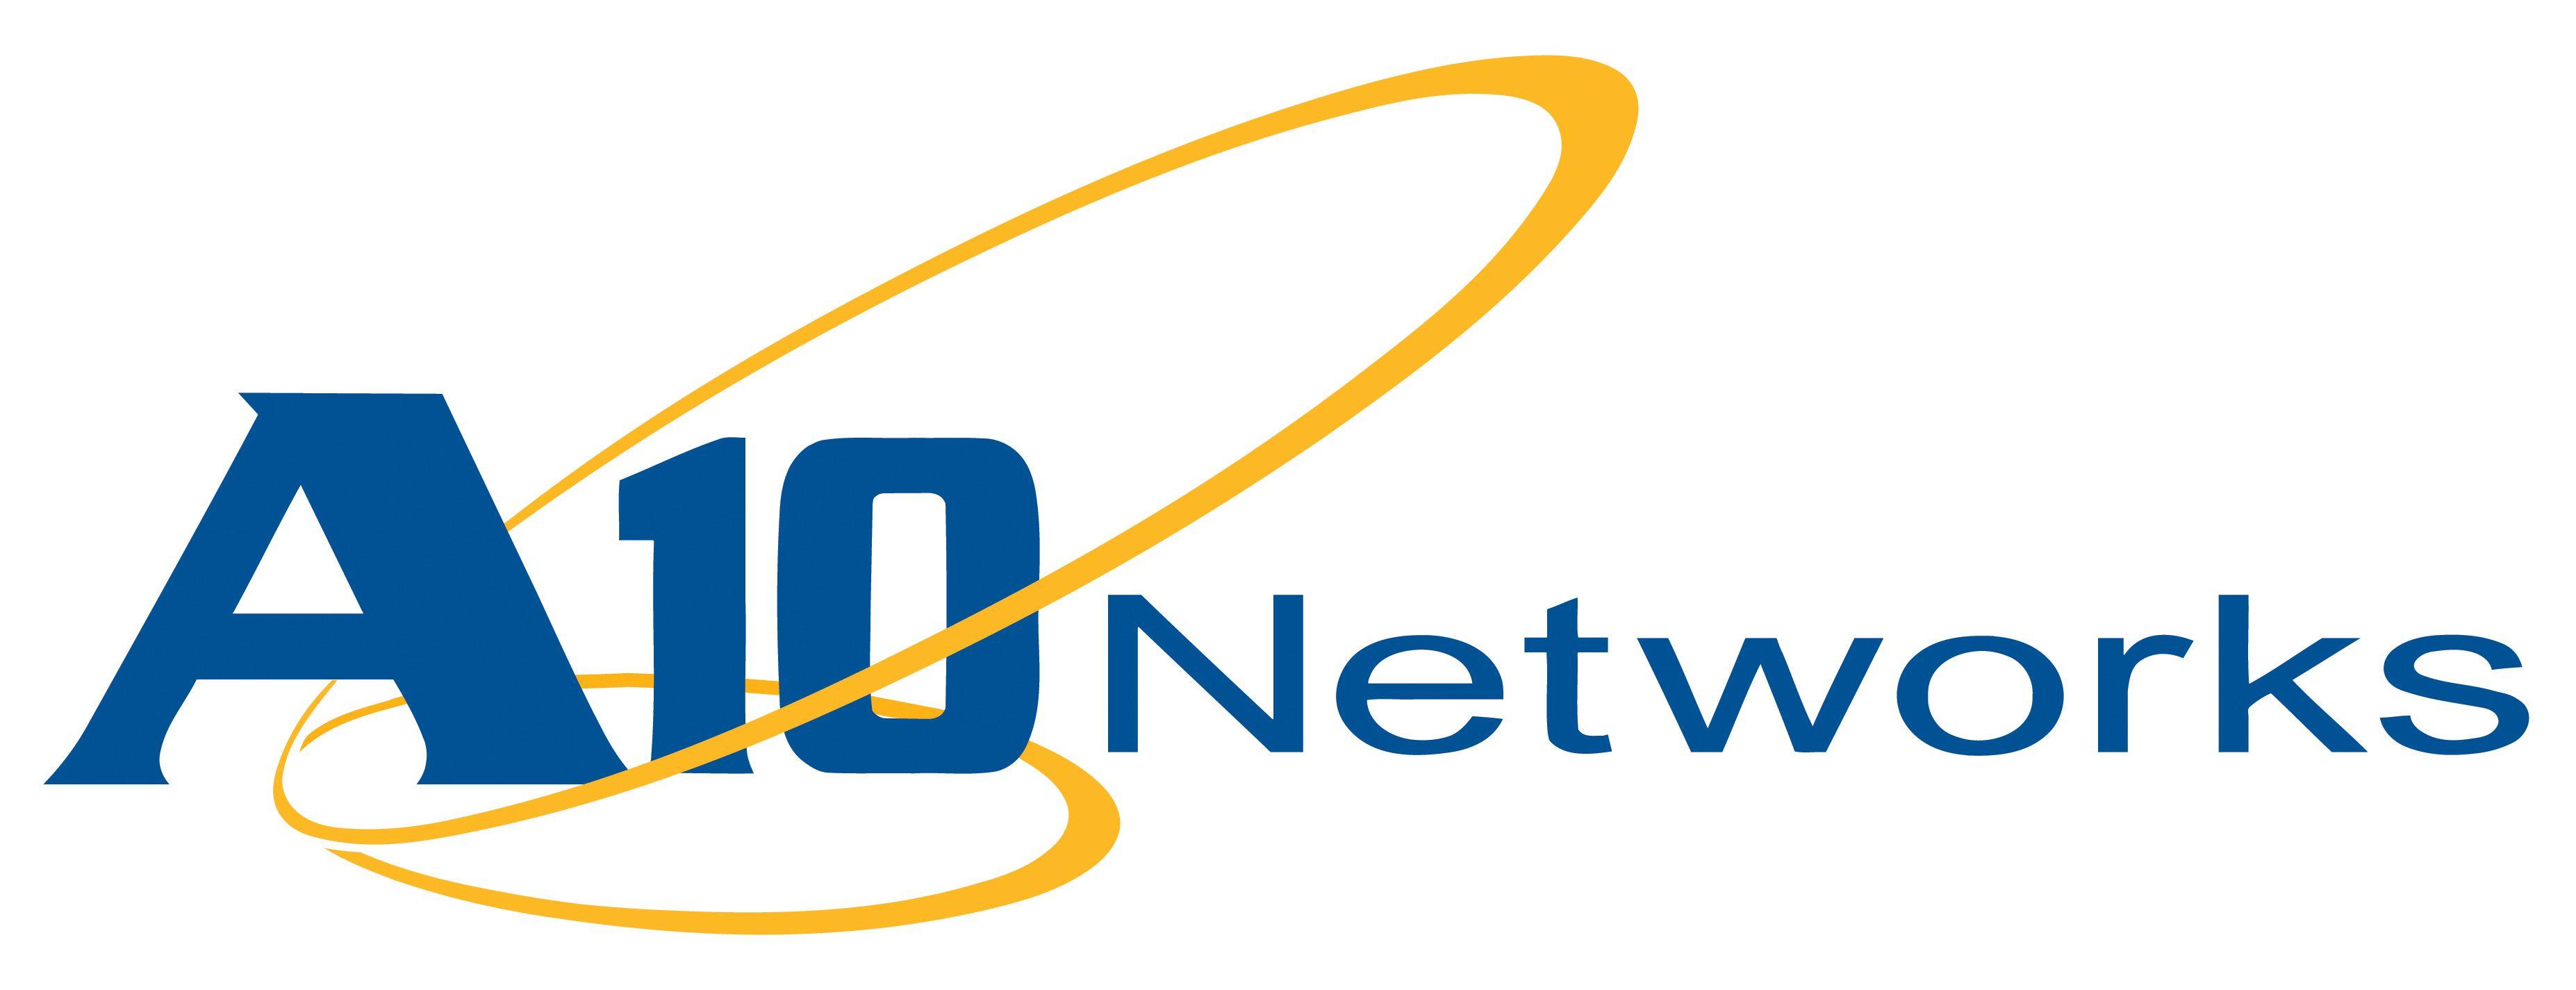 A10 Networks Logo - A10 Networks, Inc. Files Registration Statement for Proposed Initial ...